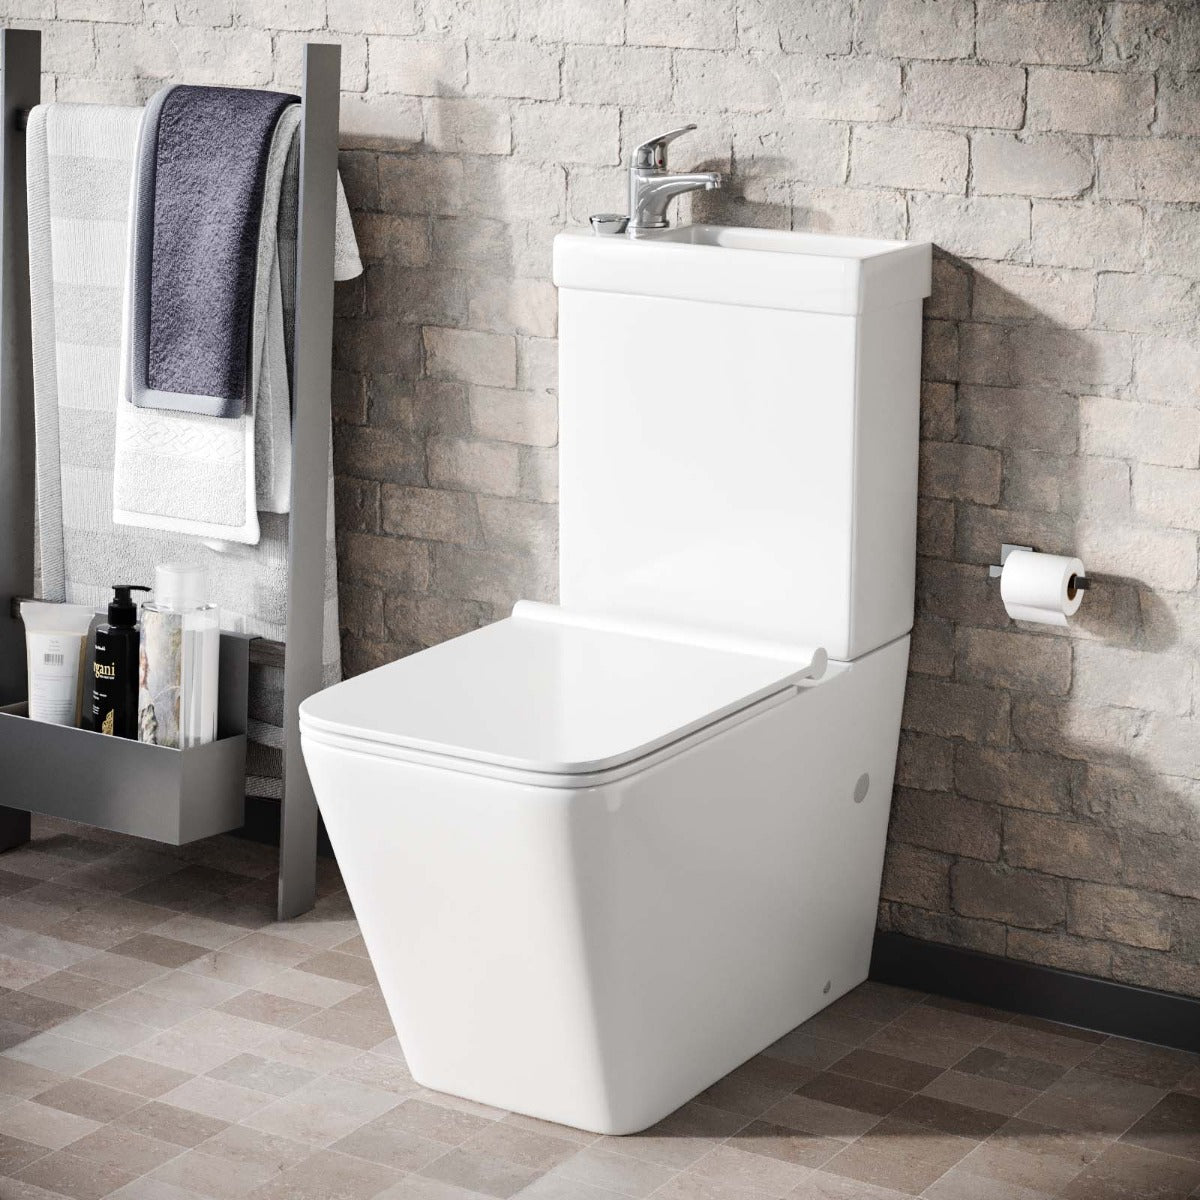 Nova 2 in 1 Combo Toilet and Basin Cloakroom Space Saver Unit  and Basin Tap and Waste